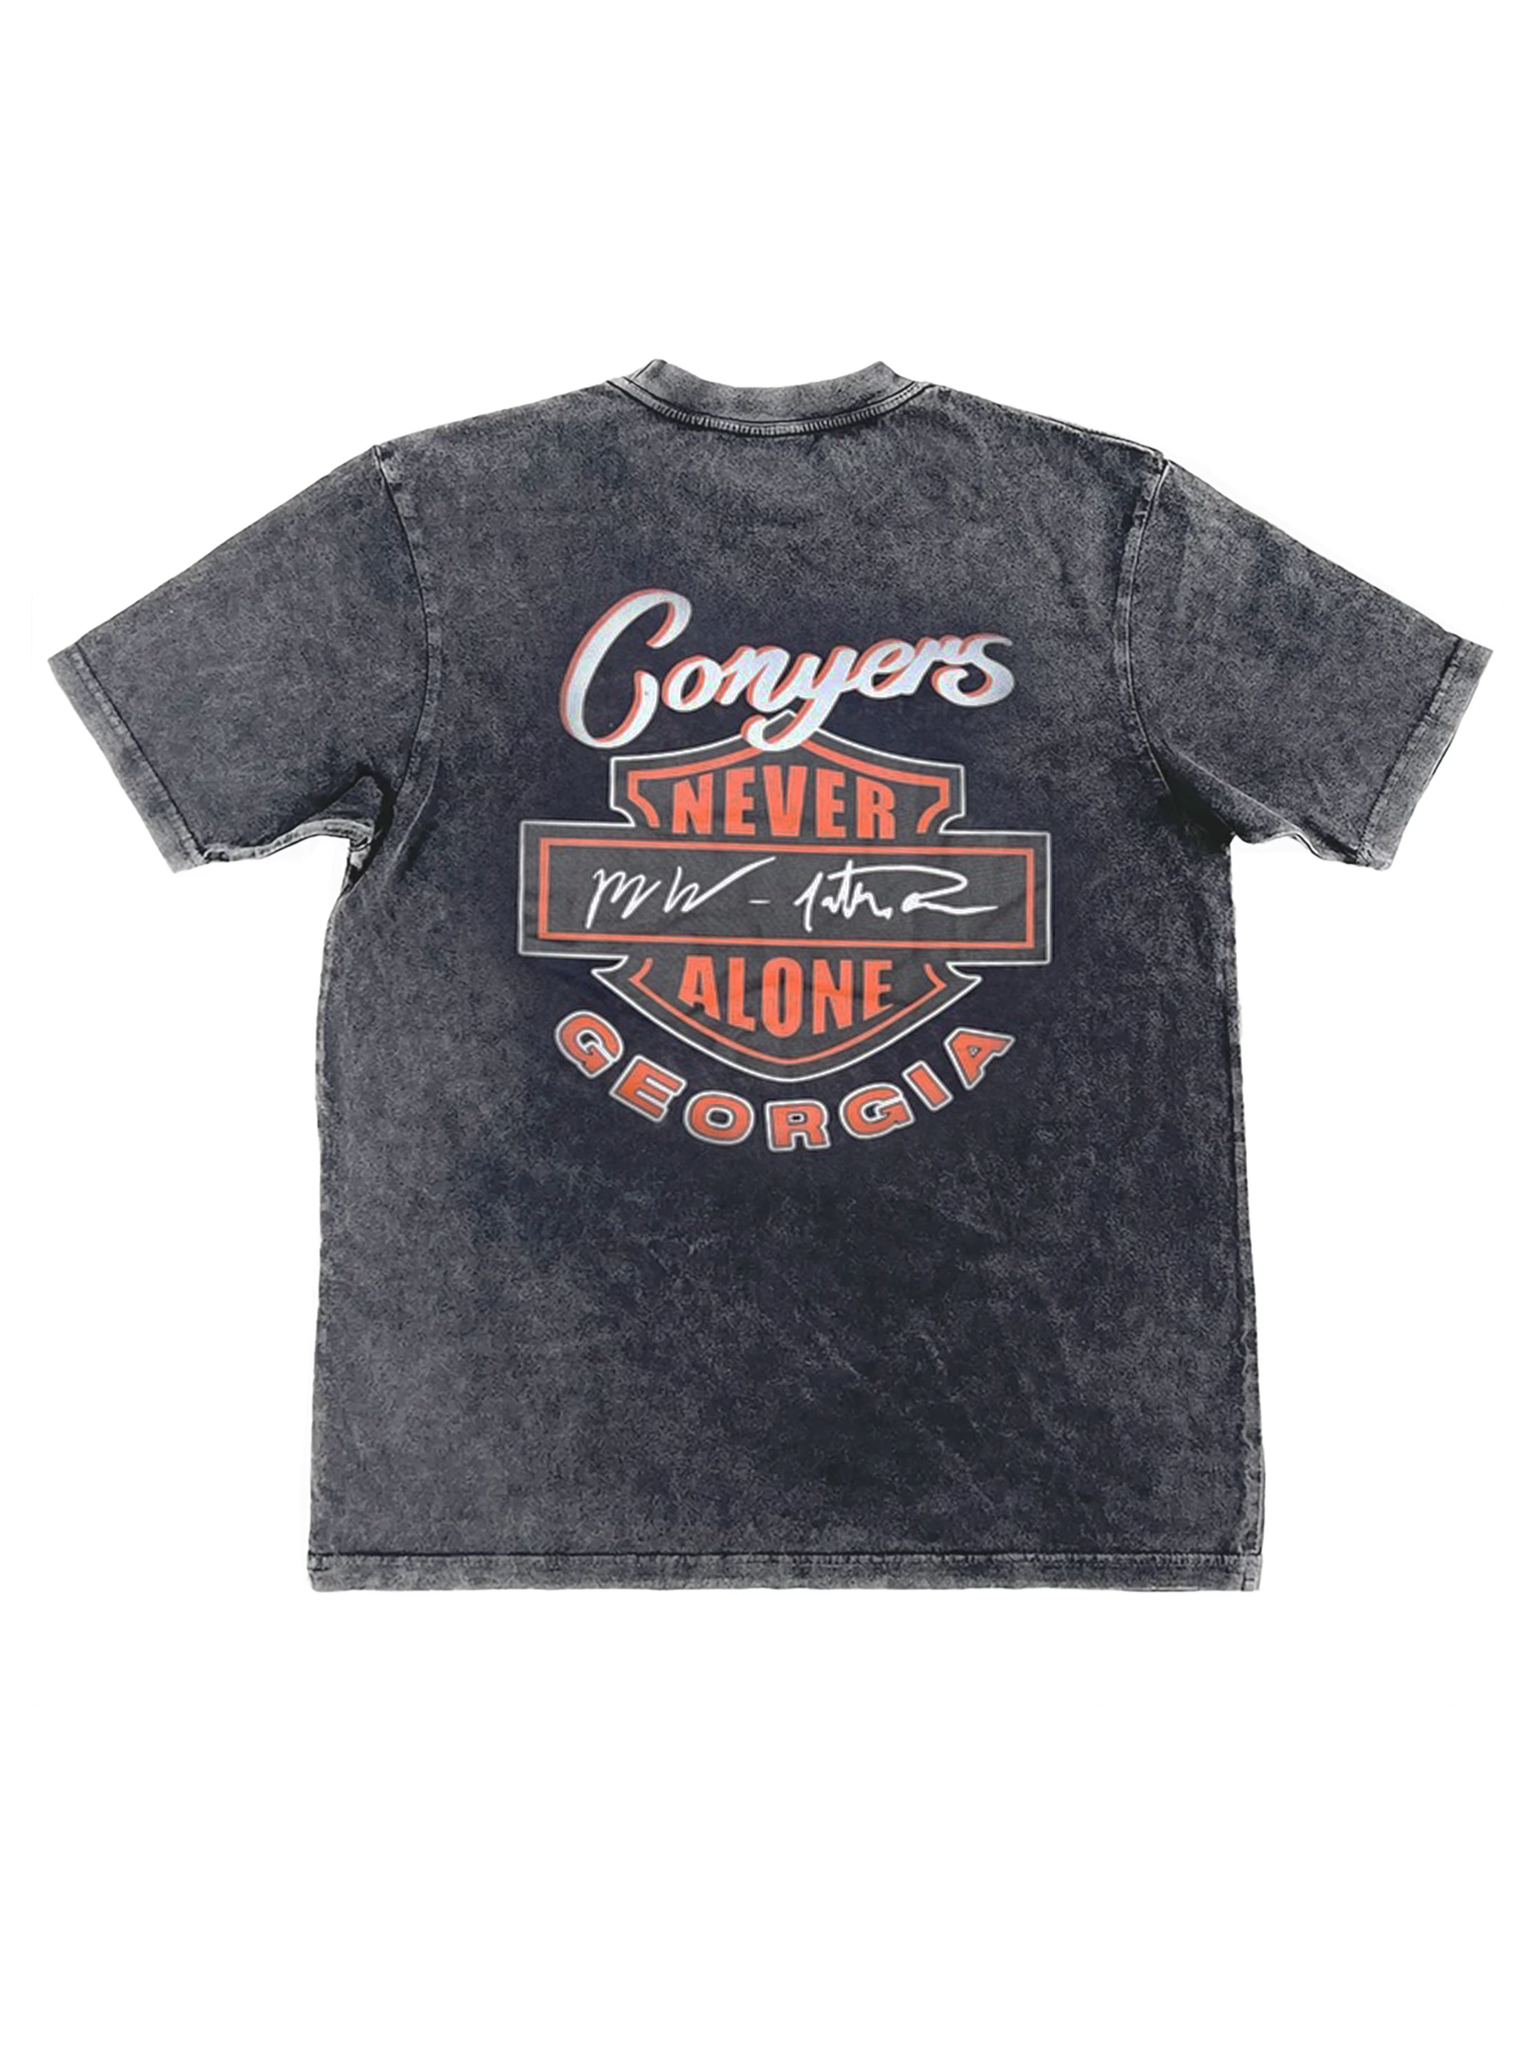 NEVER ALONE IN CONYERS SS TEE